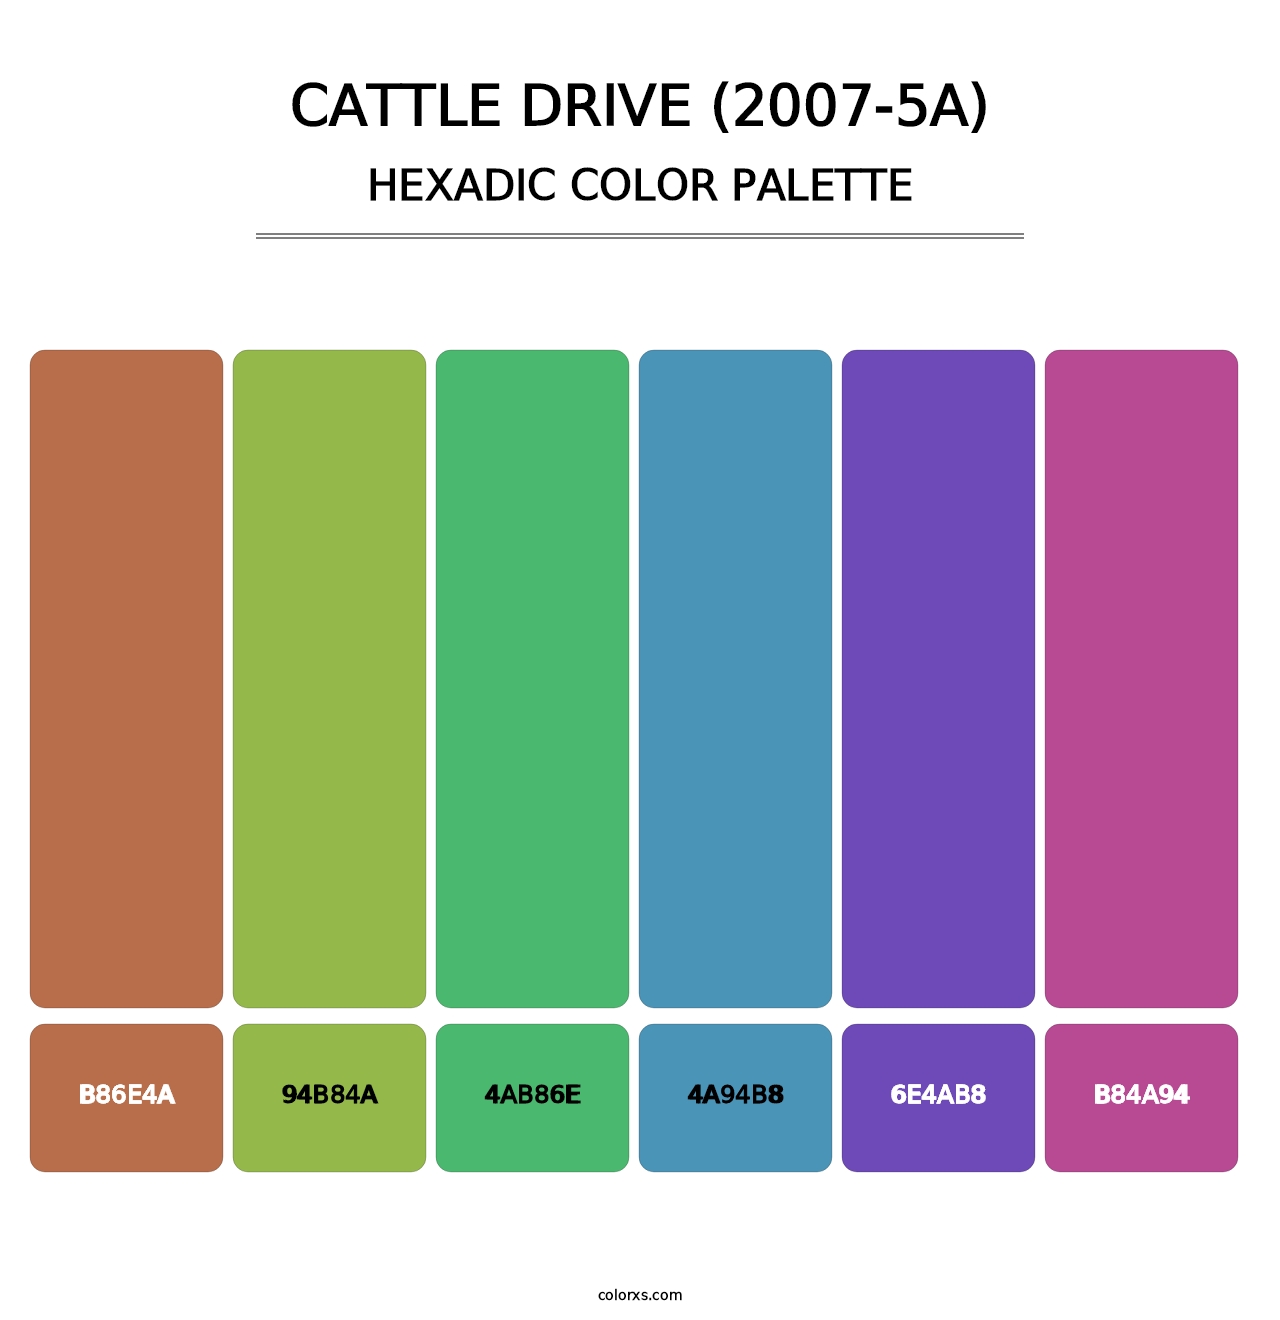 Cattle Drive (2007-5A) - Hexadic Color Palette